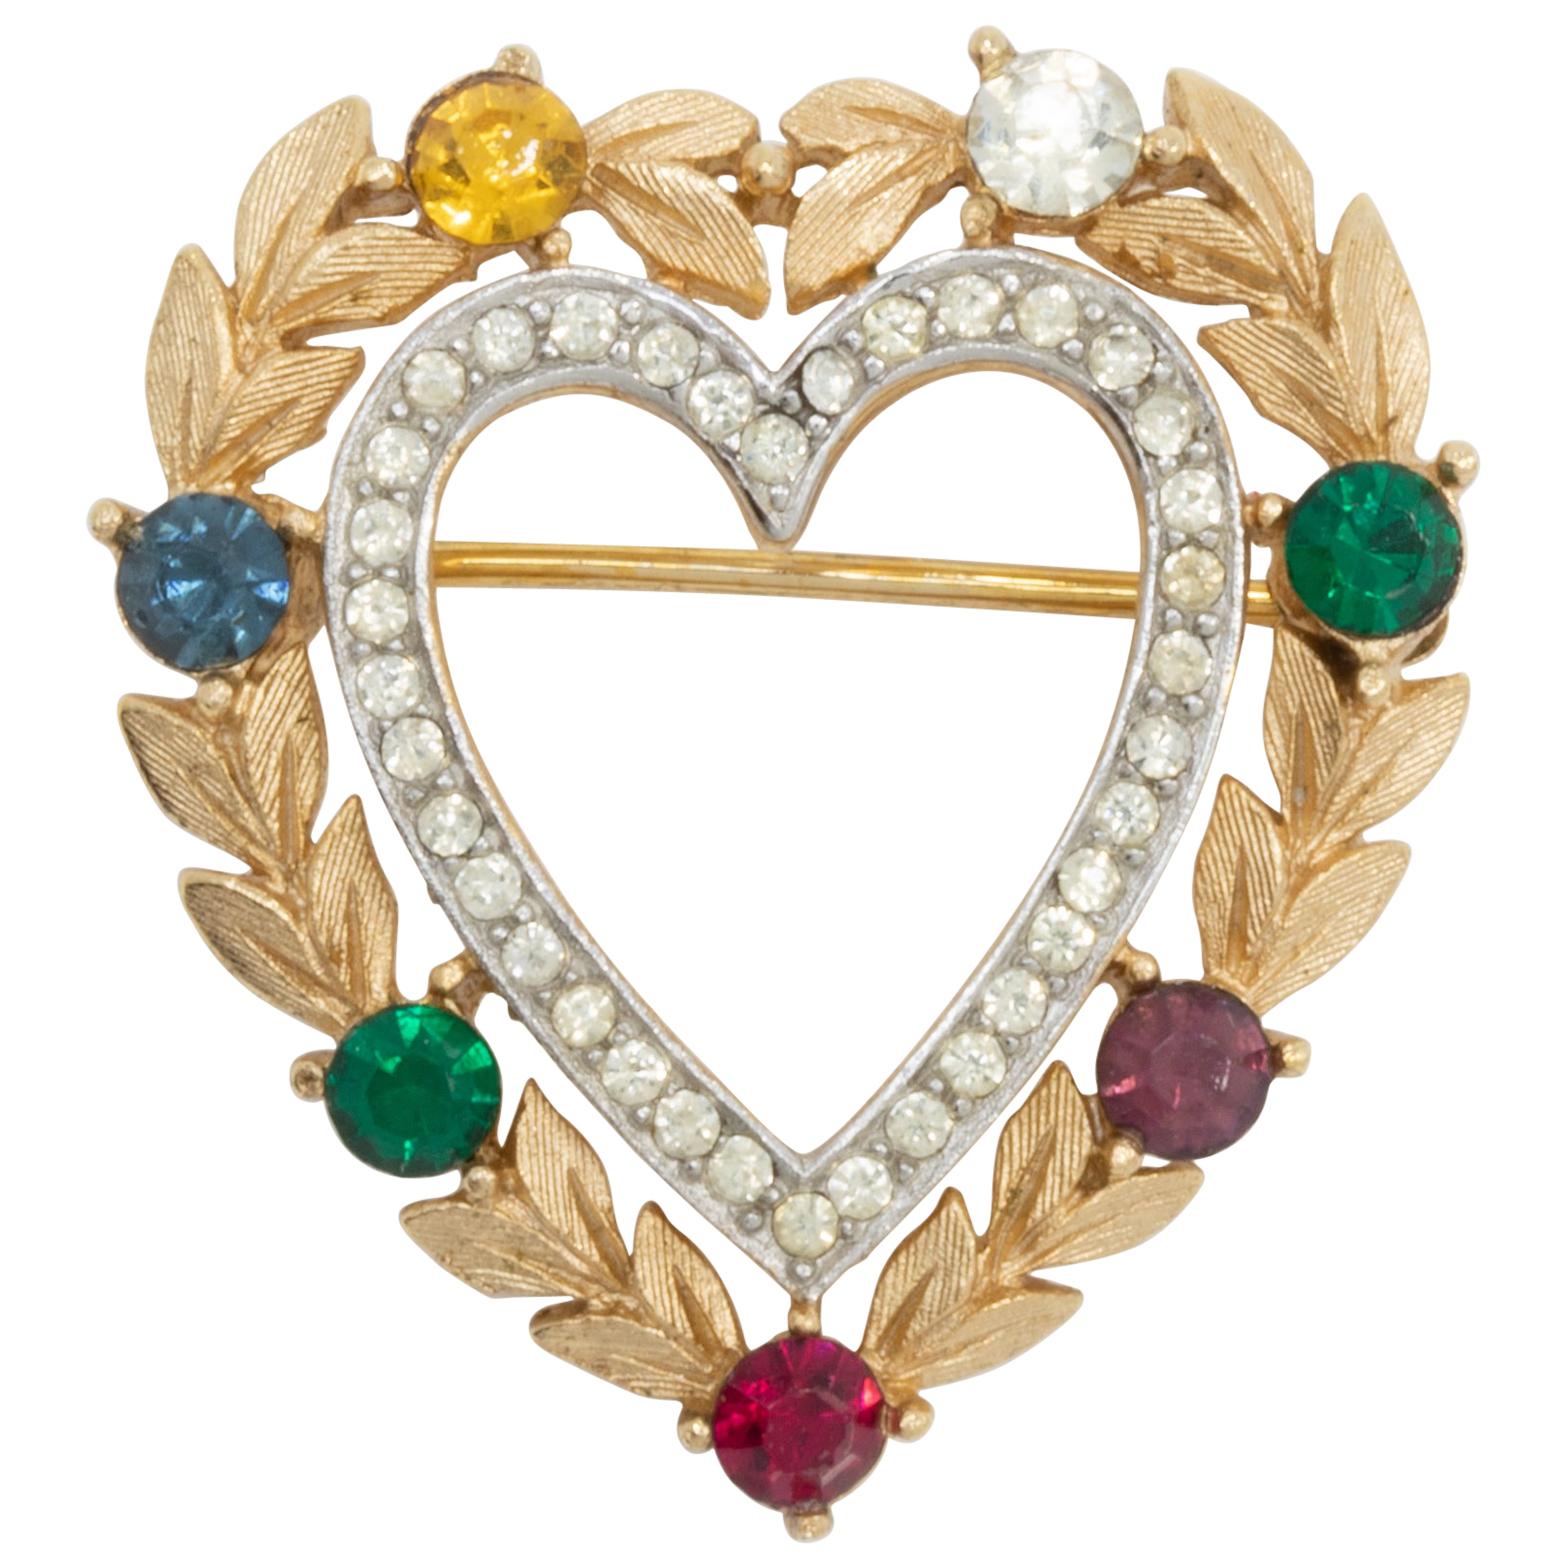 Trifari Gold "Dearest" Heart Pin Brooch with Simulated Gemstones